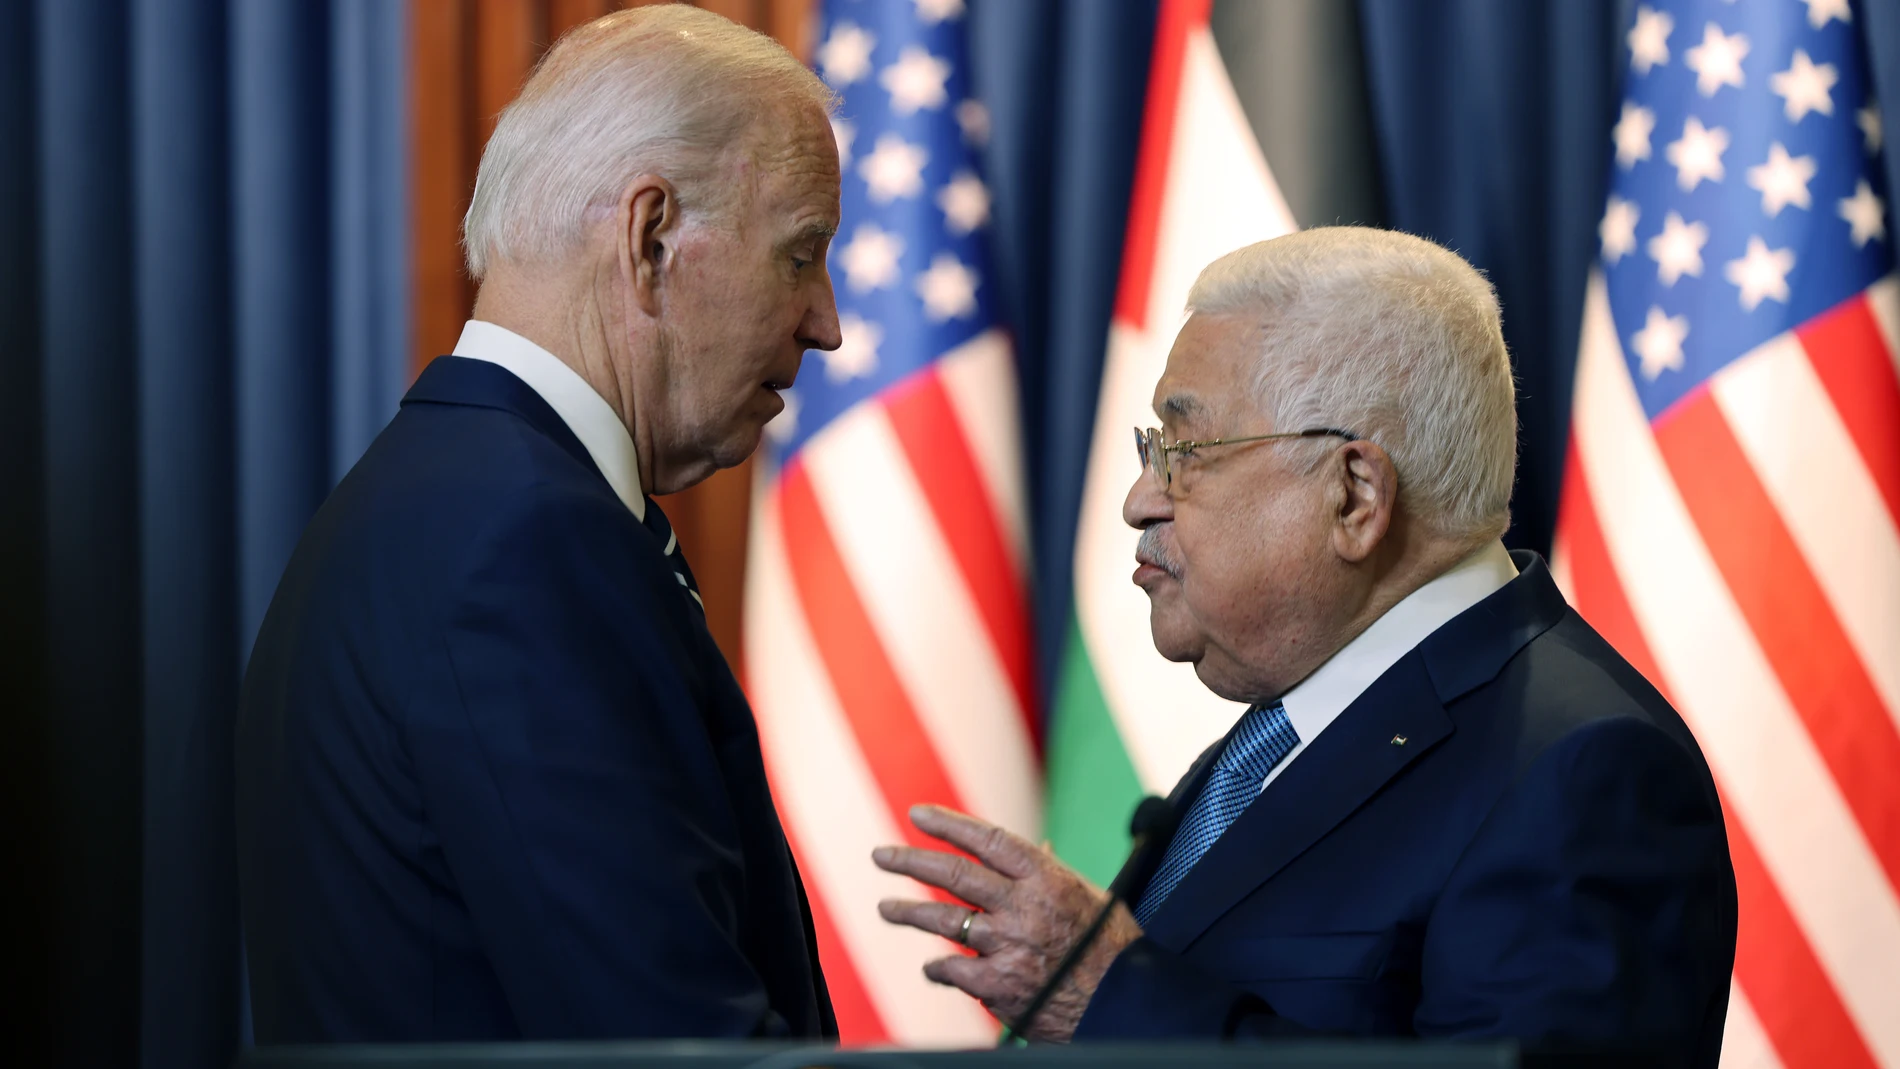 July 15, 2022, Bethlehem, West Bank, Palestinian Territory: Palestinian president MAHMUD ABBAS and US President JOE BIDEN deliver statements to the media after their meeting at the Muqataa Presidential Compound in the city of Bethlehem in the West Bank. (Foto de ARCHIVO) 15/07/2022